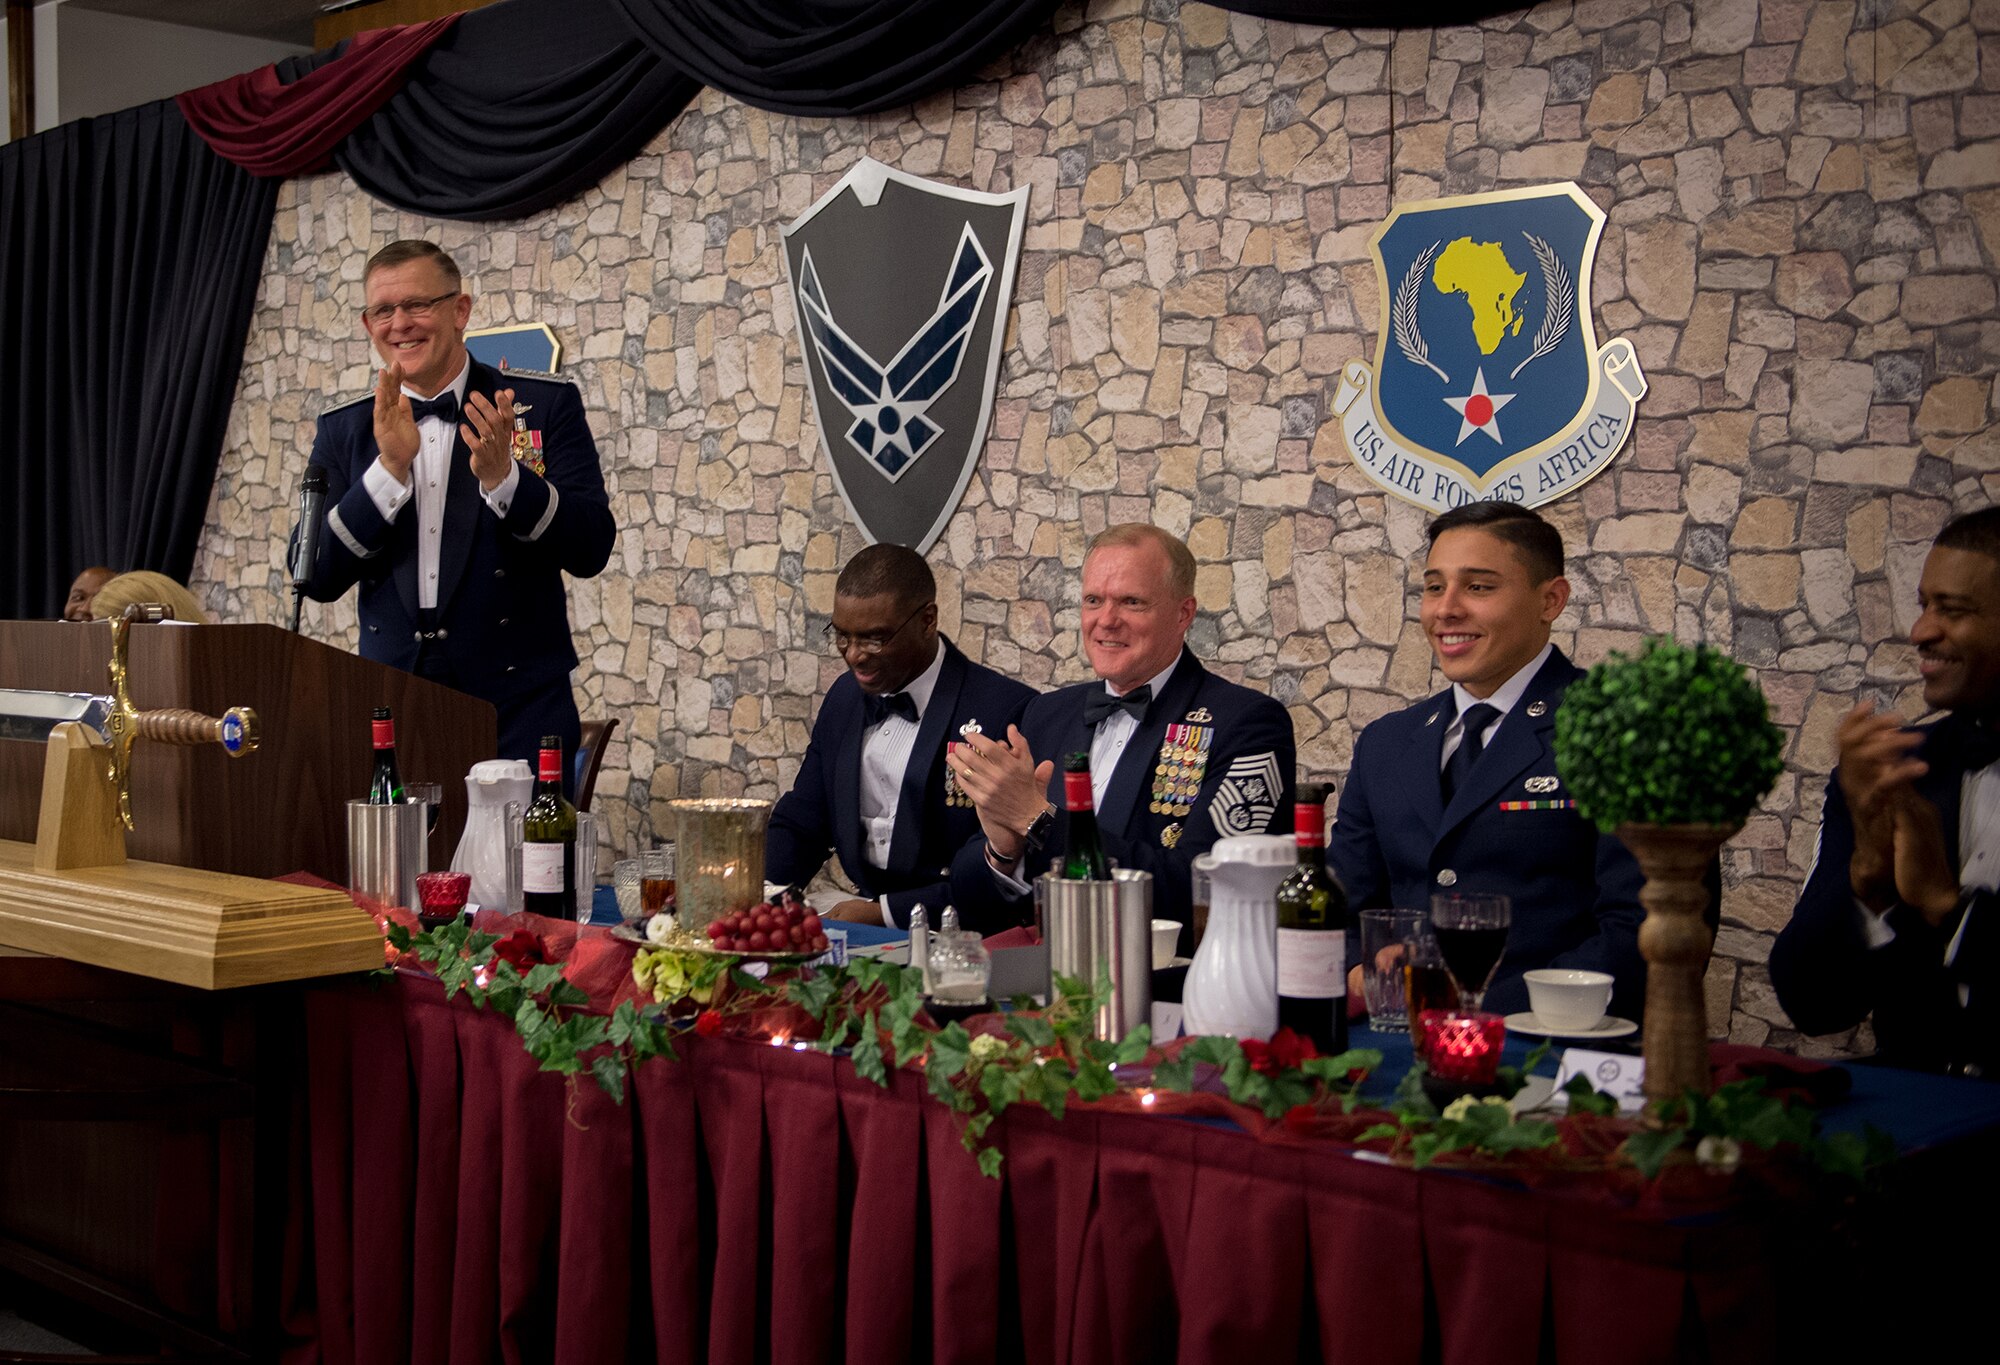 Gen. Frank Gorenc, U.S. Air Forces in Europe and Air Forces Africa commander, laughs with the crowd while speaking to the enlisted force during an Order of the Sword ceremony held at Ramstein Air Base, Germany, April 7, 2016. The Order of the Sword is a special program where noncommisioned officers of a command recognize individuals who have made significant contributions to the enlisted corps. Gorenc is the 20th USAFE-AFAFRICA commander to be awarded this honor. (U.S. Air Force photo/ Tech. Sgt. Ryan Crane)